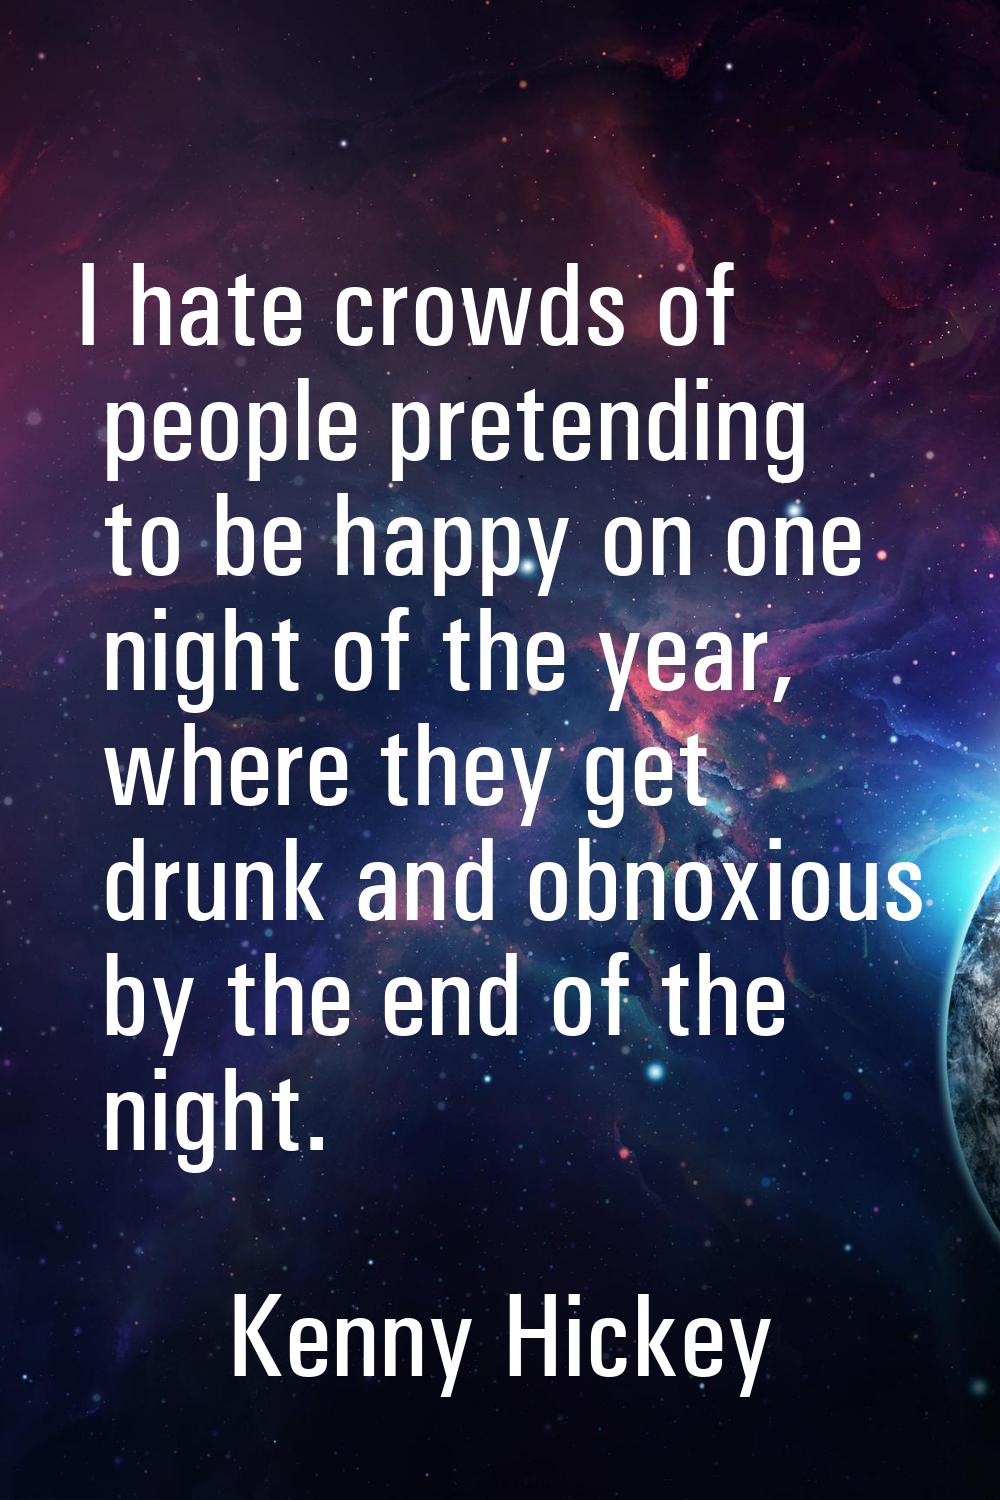 I hate crowds of people pretending to be happy on one night of the year, where they get drunk and o